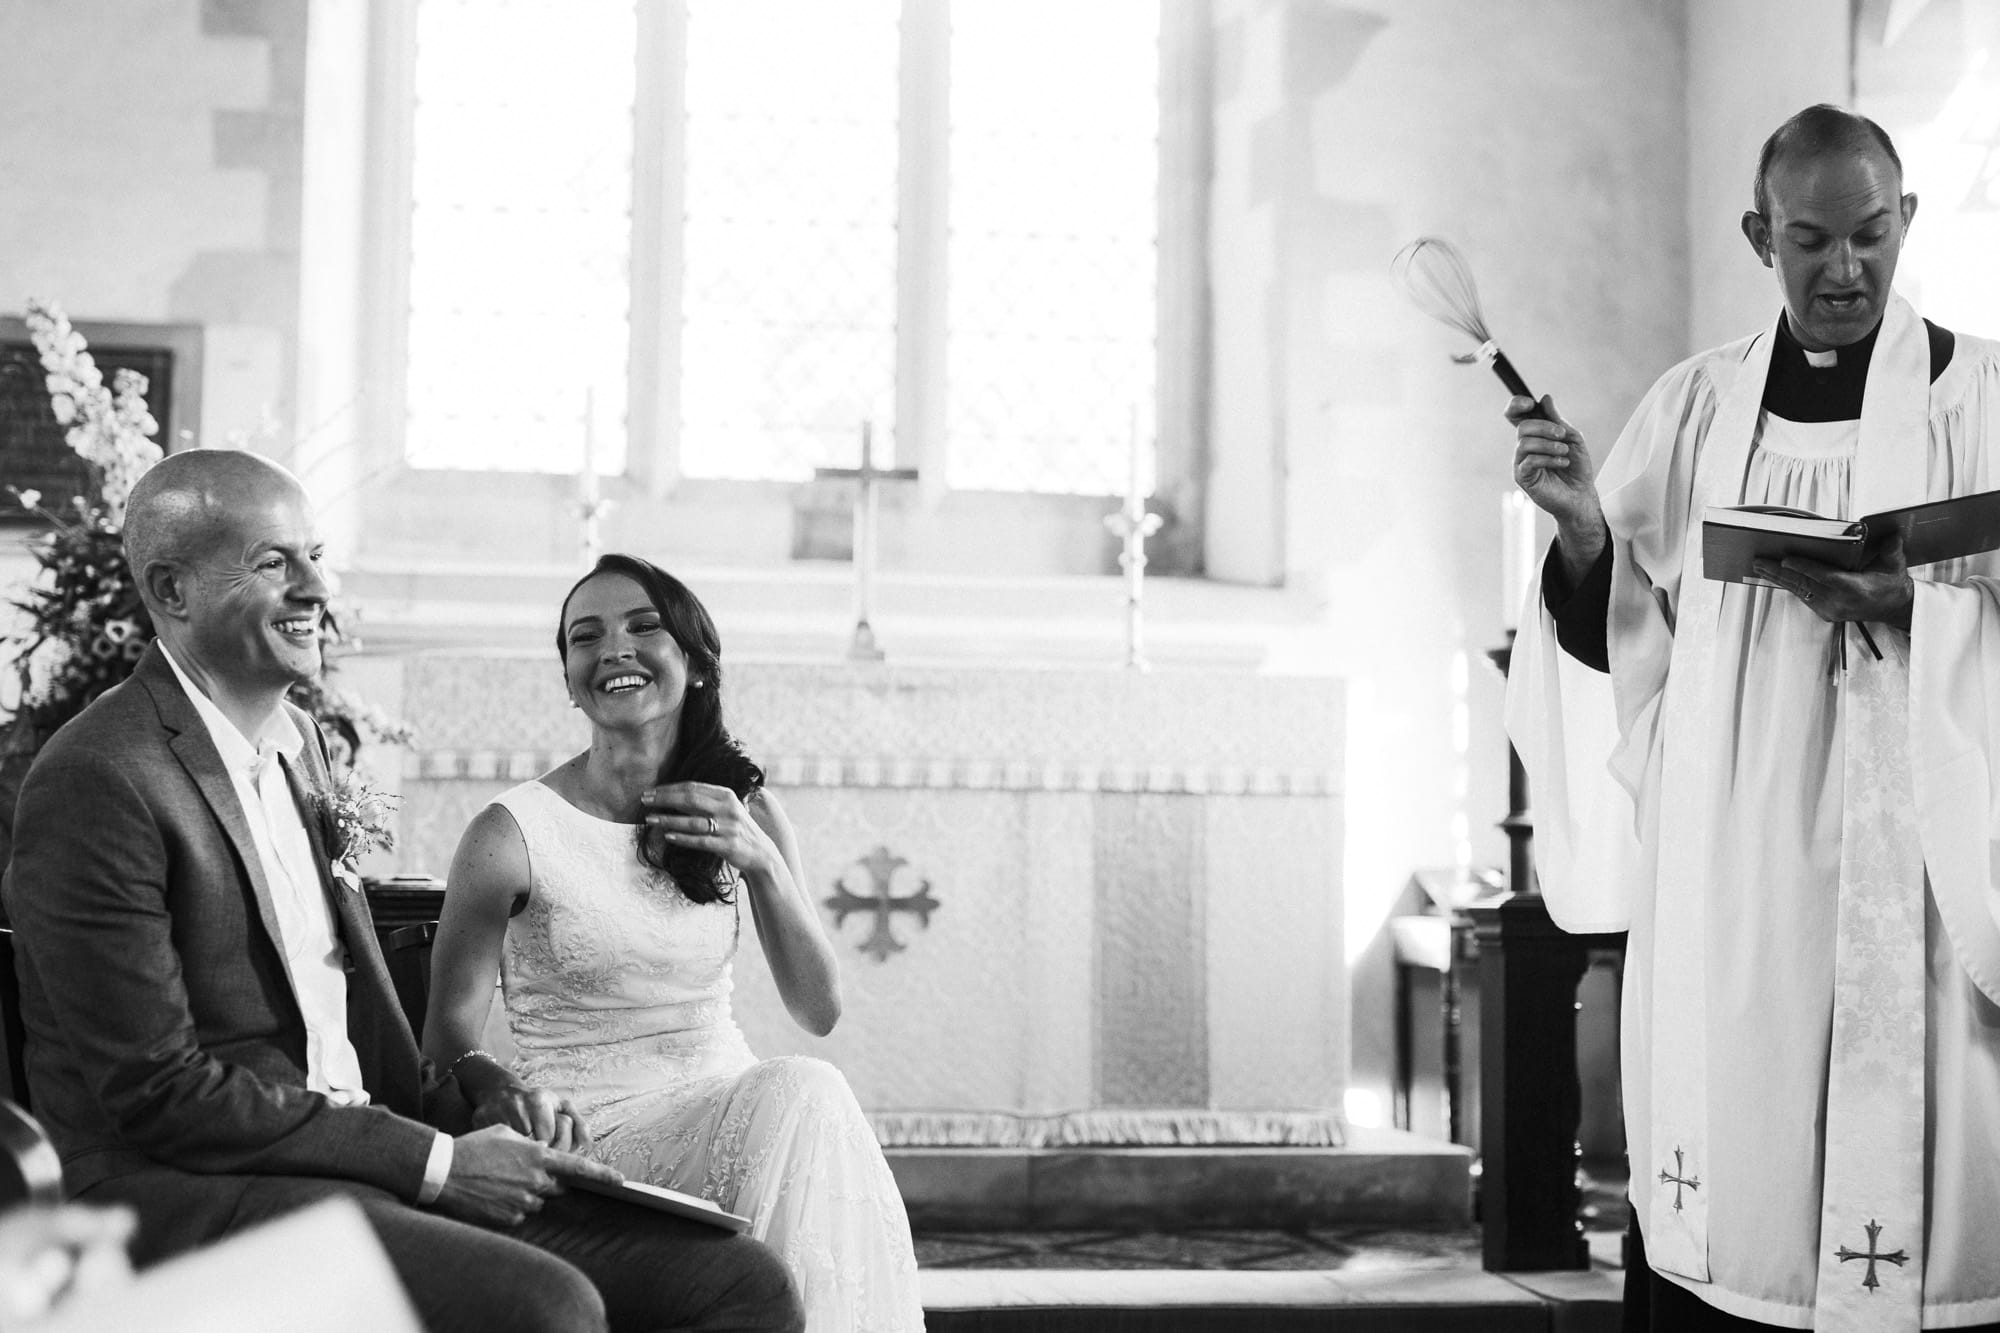 vicar explains that marriage needs a whisk